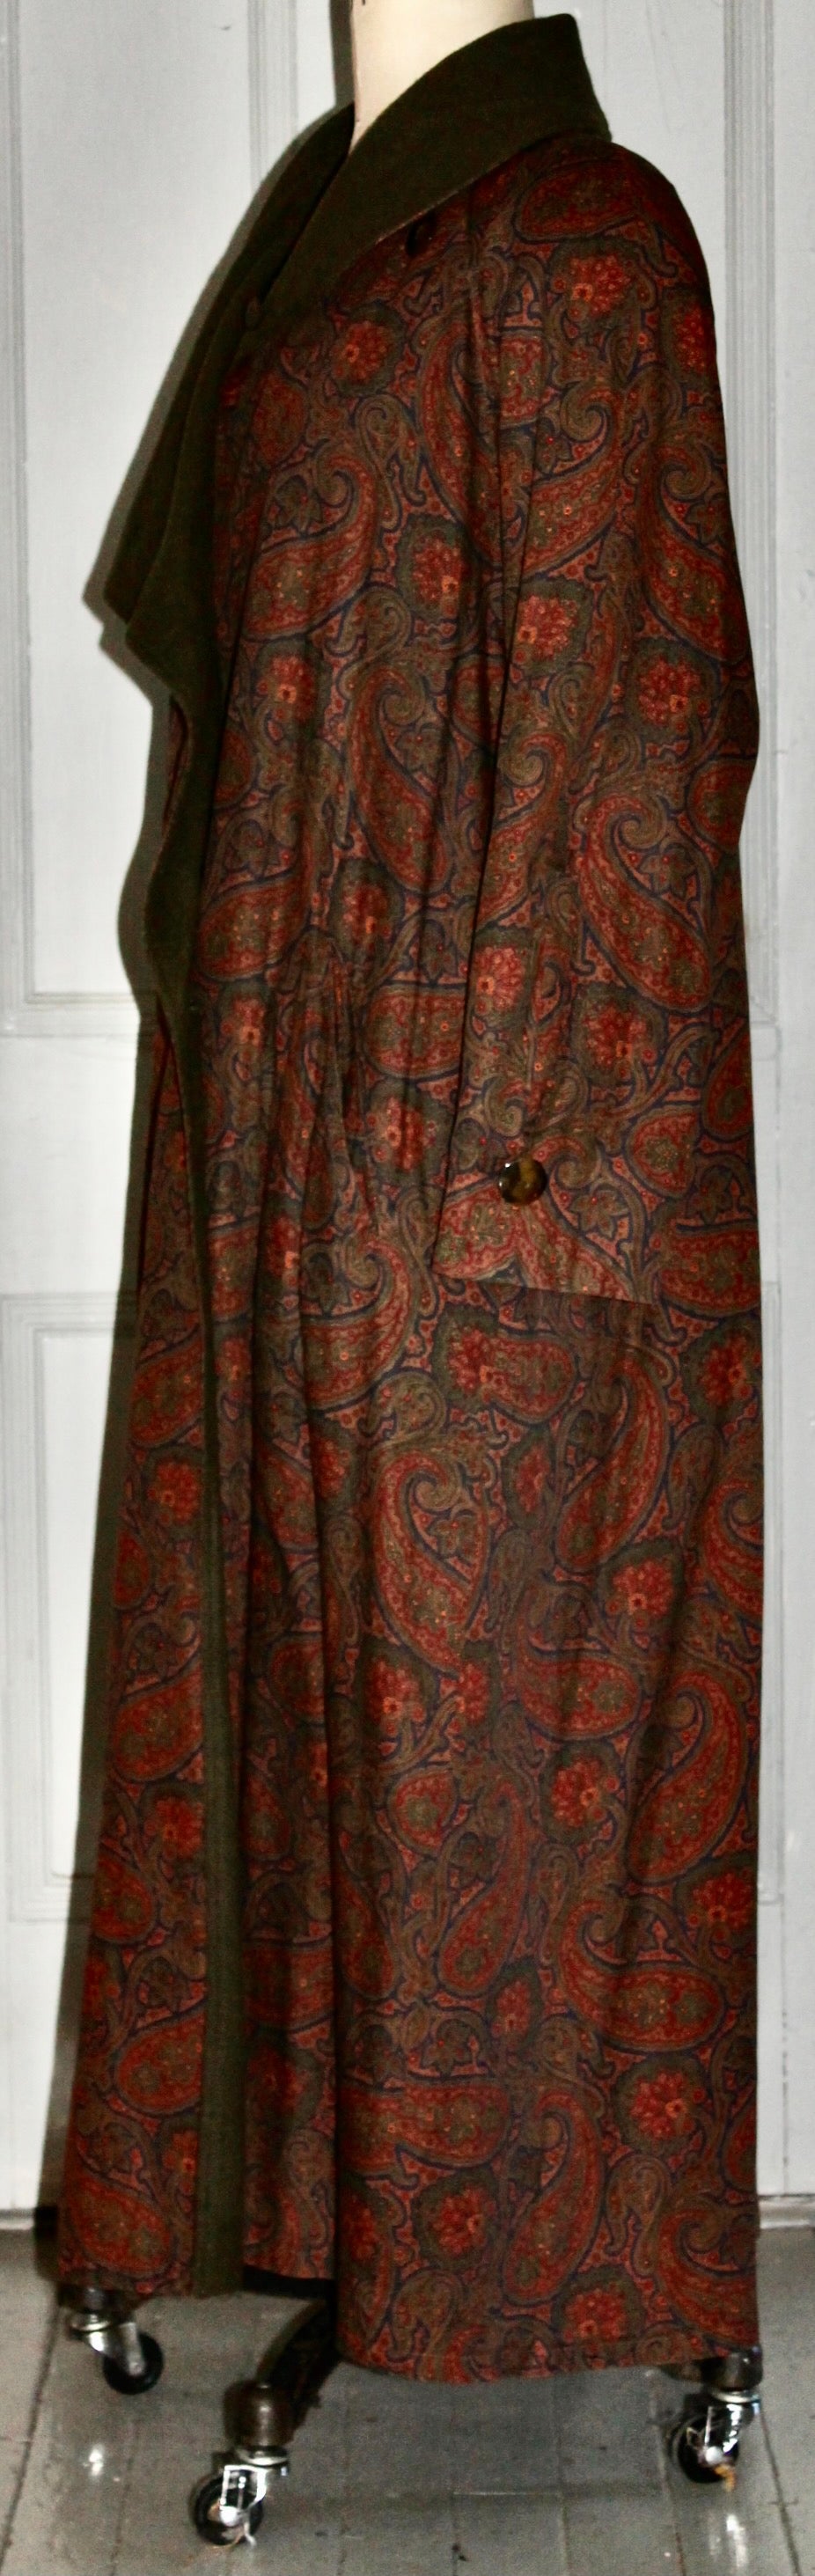 Offering a Bill Blass Paisley patterned coat of Edwardian inspiration.  Coat is cotton, with a flannel wool lining.  Fully lined. And labeled- Made in Japan.